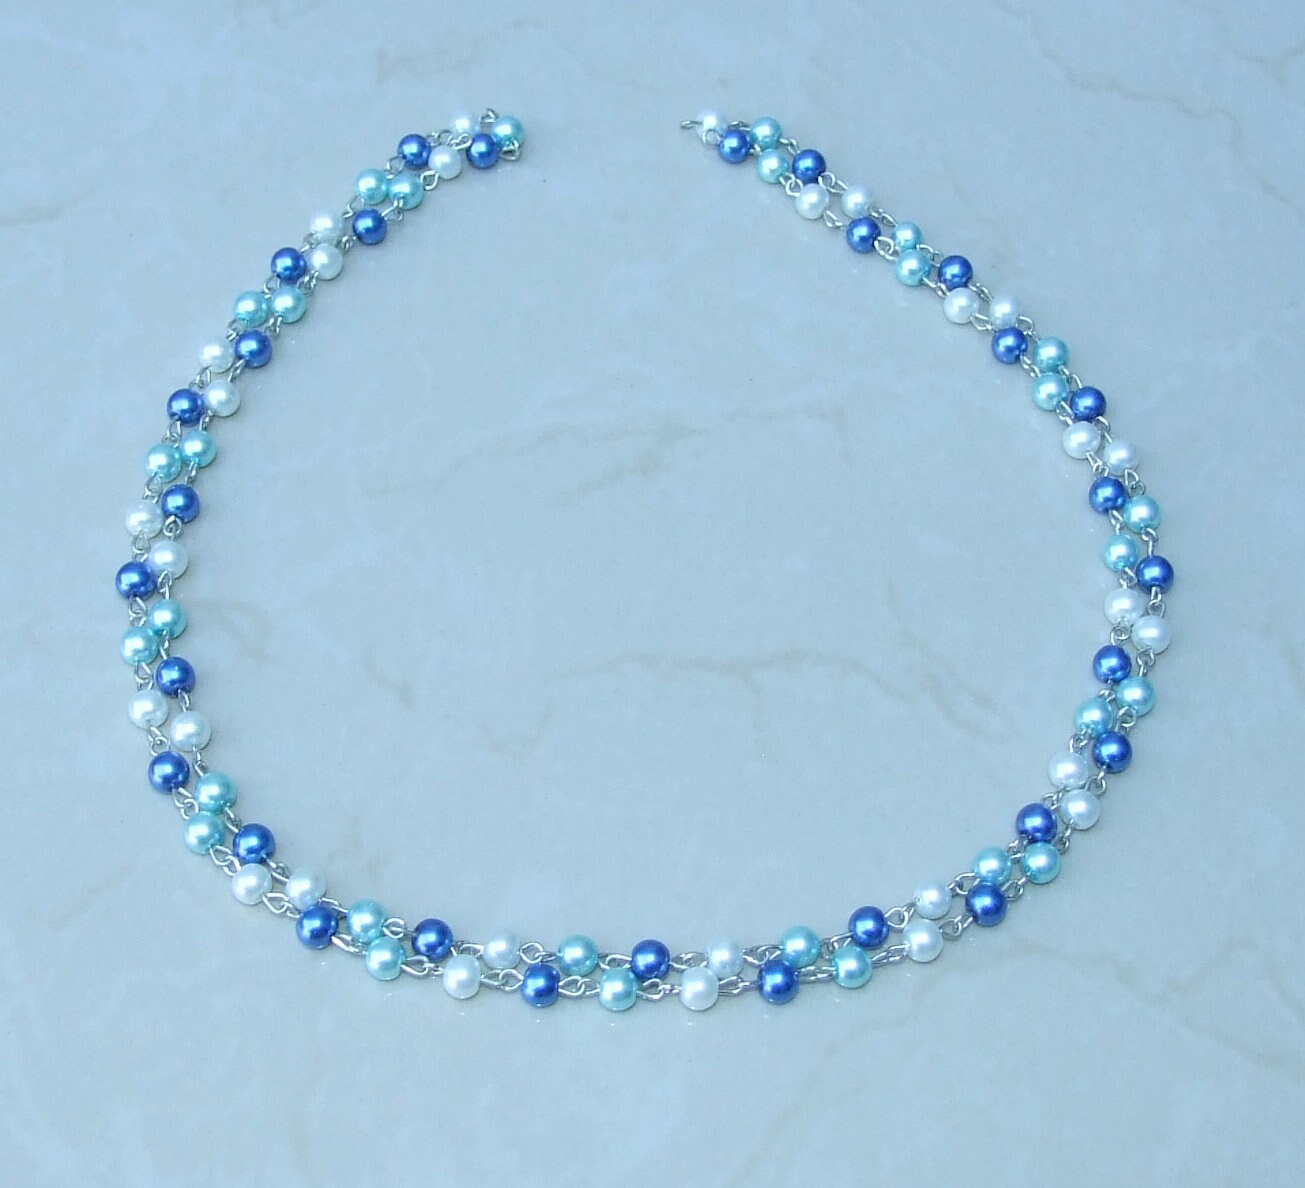 White & Blue Pearl Rosary Chain, 1 Meter, Glass Beads, Beaded Chain, Body Chain Jewelry, Silver Chain, Necklace Chain, Belly Chain, 6mm, 303